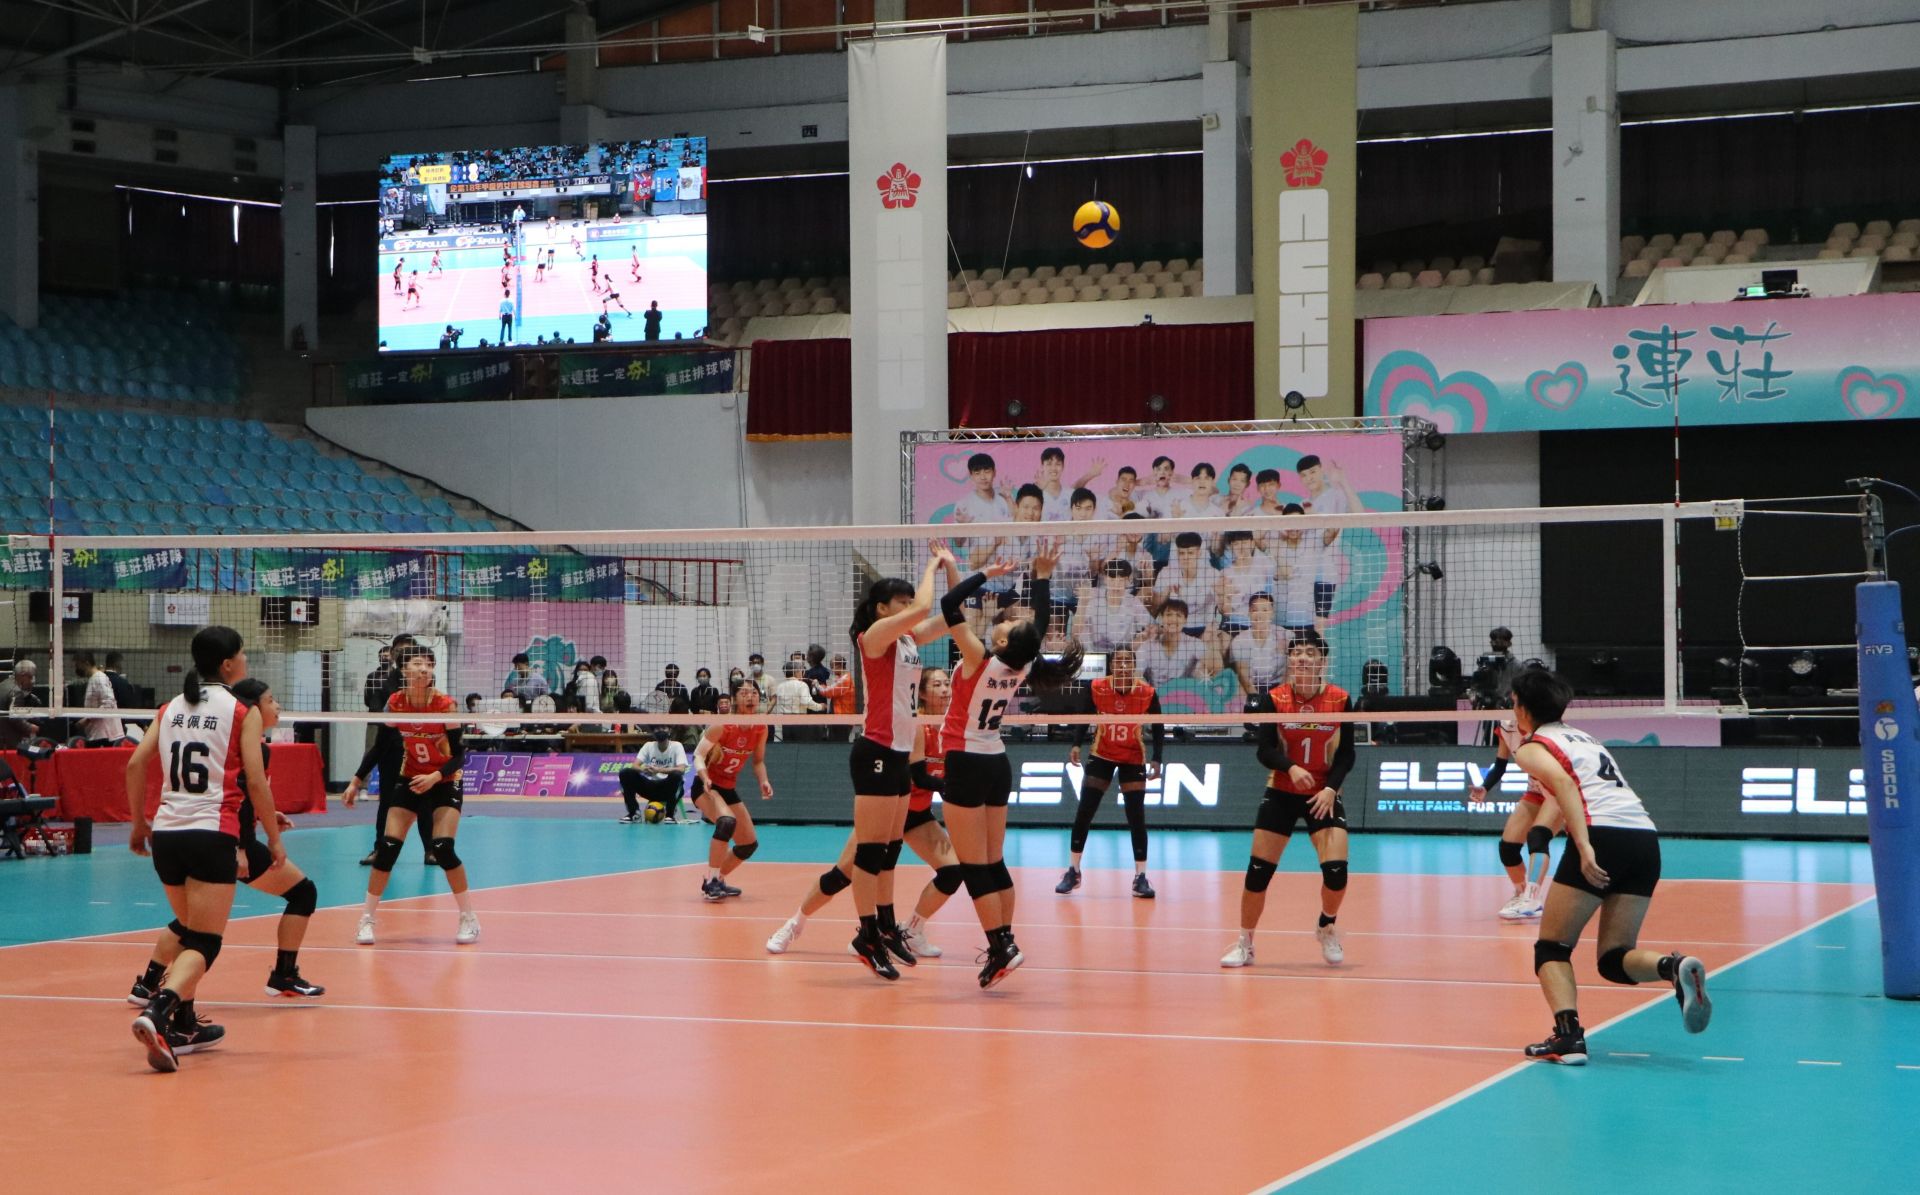 The Enterprise Volleyball League kicked off at NCKU, showcasing smart sports broadcasting technology live for the first time.